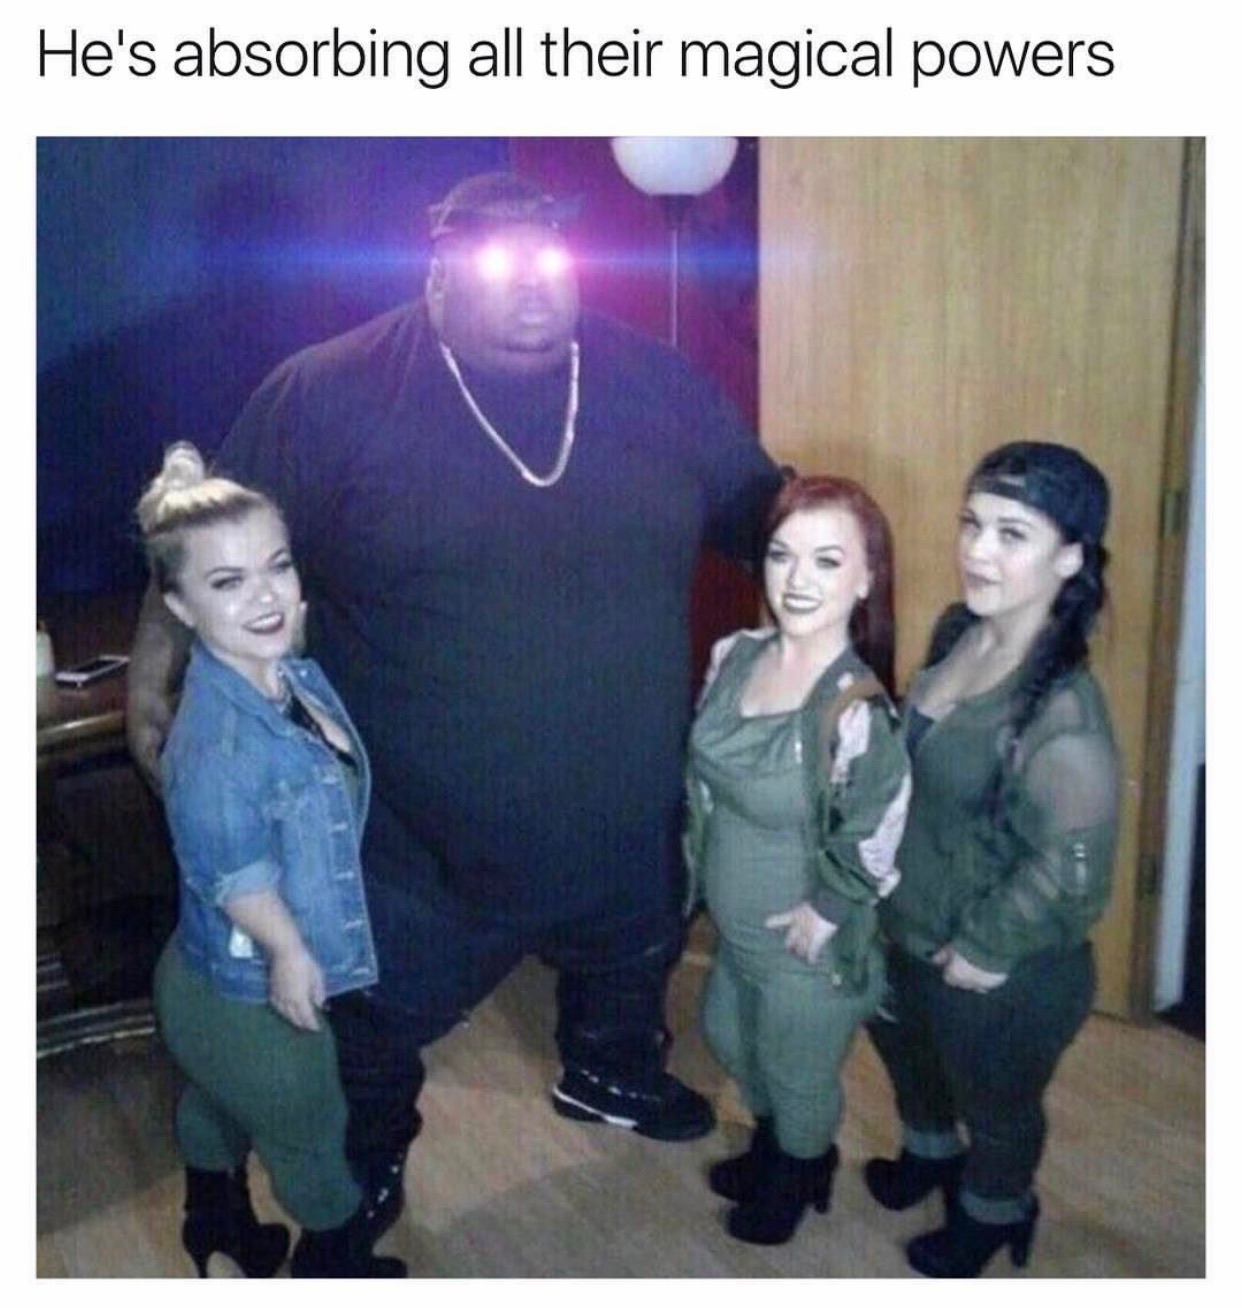 tater thots - He's absorbing all their magical powers